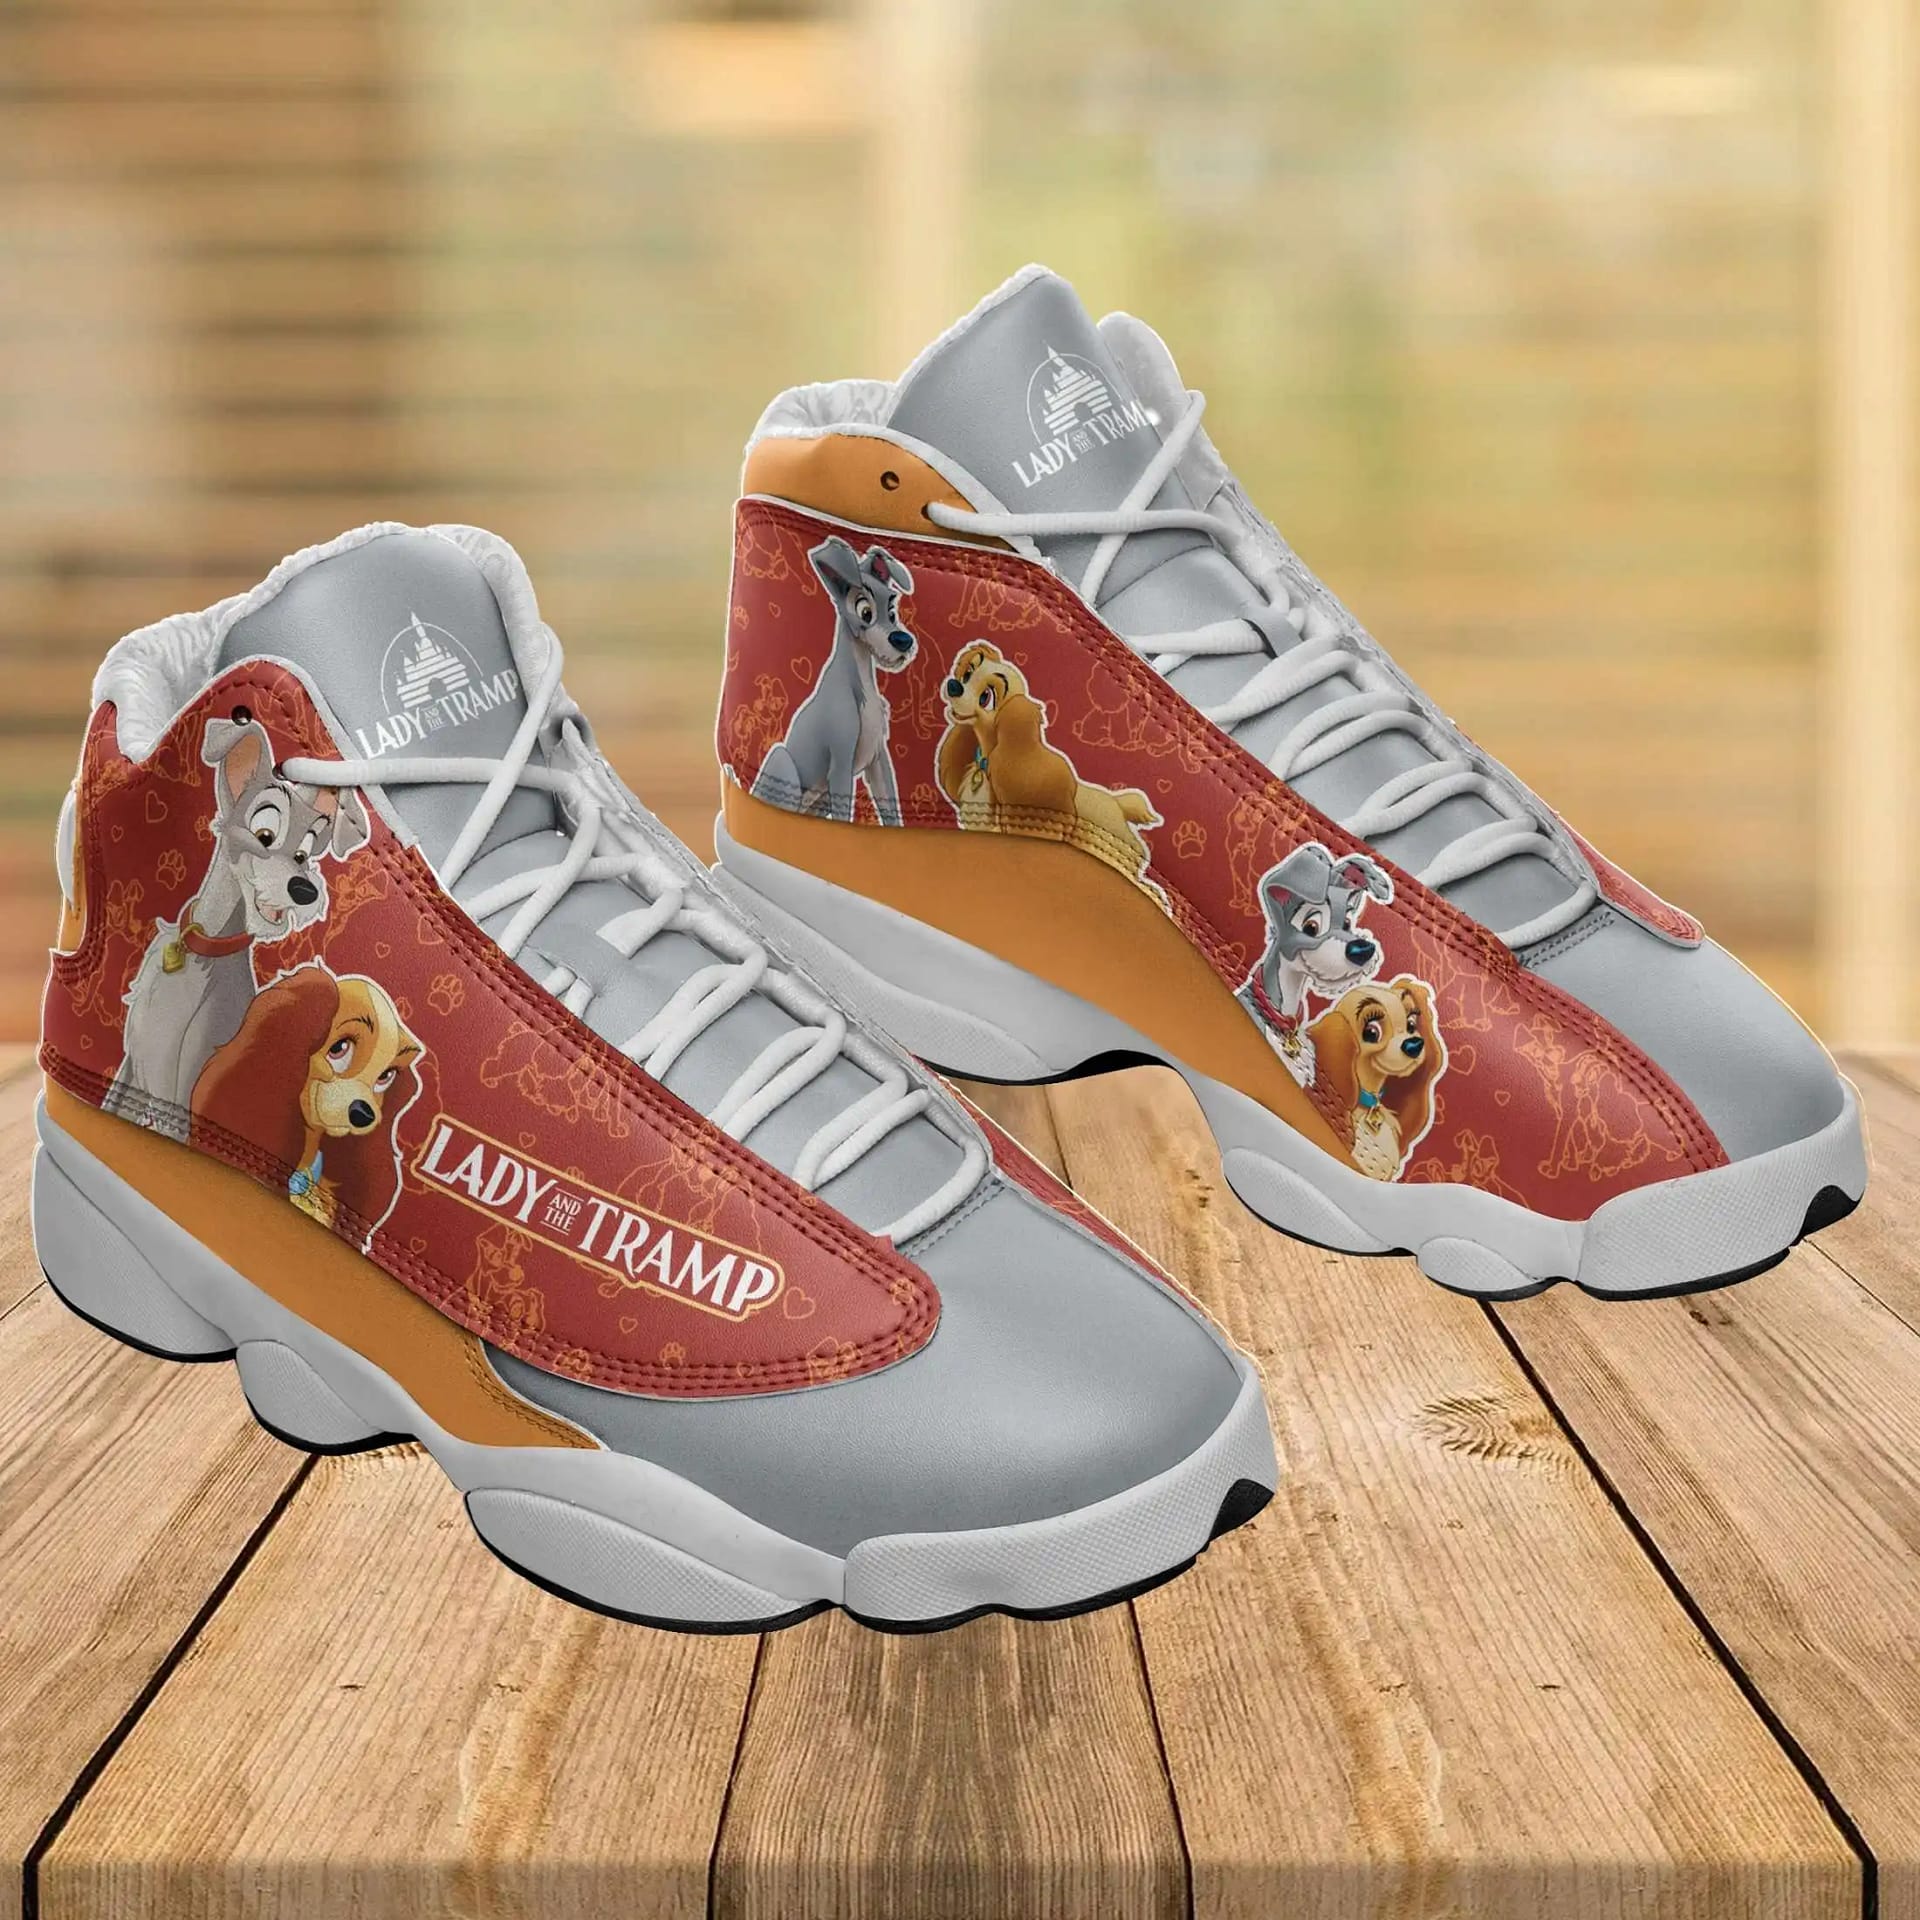 Lady And The Tramp Air Jordan Shoes